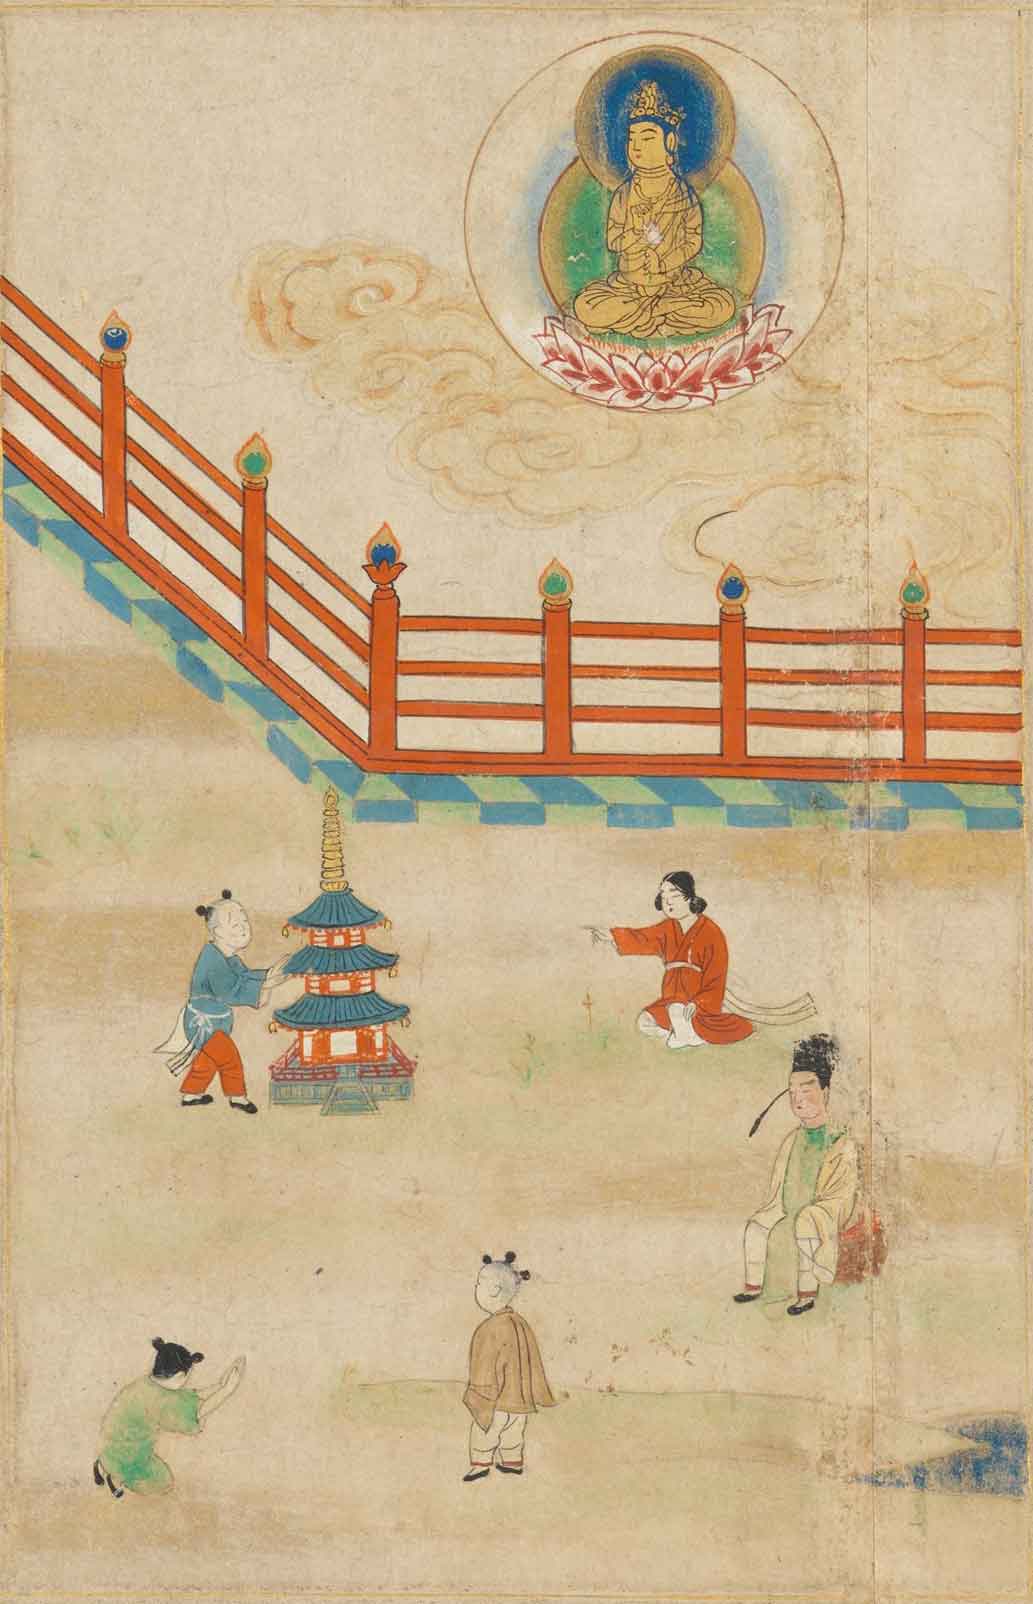 Sugawara Mitsushige (Japanese, active mid-1200s), “Universal Gateway,” Chapter 25 of the Lotus Sutra (detail images), 1257, Kamakura period (1185–1333), Japan, handscroll; ink, color, and gold on paper, 9 11/16 in. x 30 ft. 8 1/16 in. (24.6 x 934.9 cm). The Metropolitan Museum of Art. Purchase, Louisa Eldridge McBurney Gift, 1953, 53.7.3